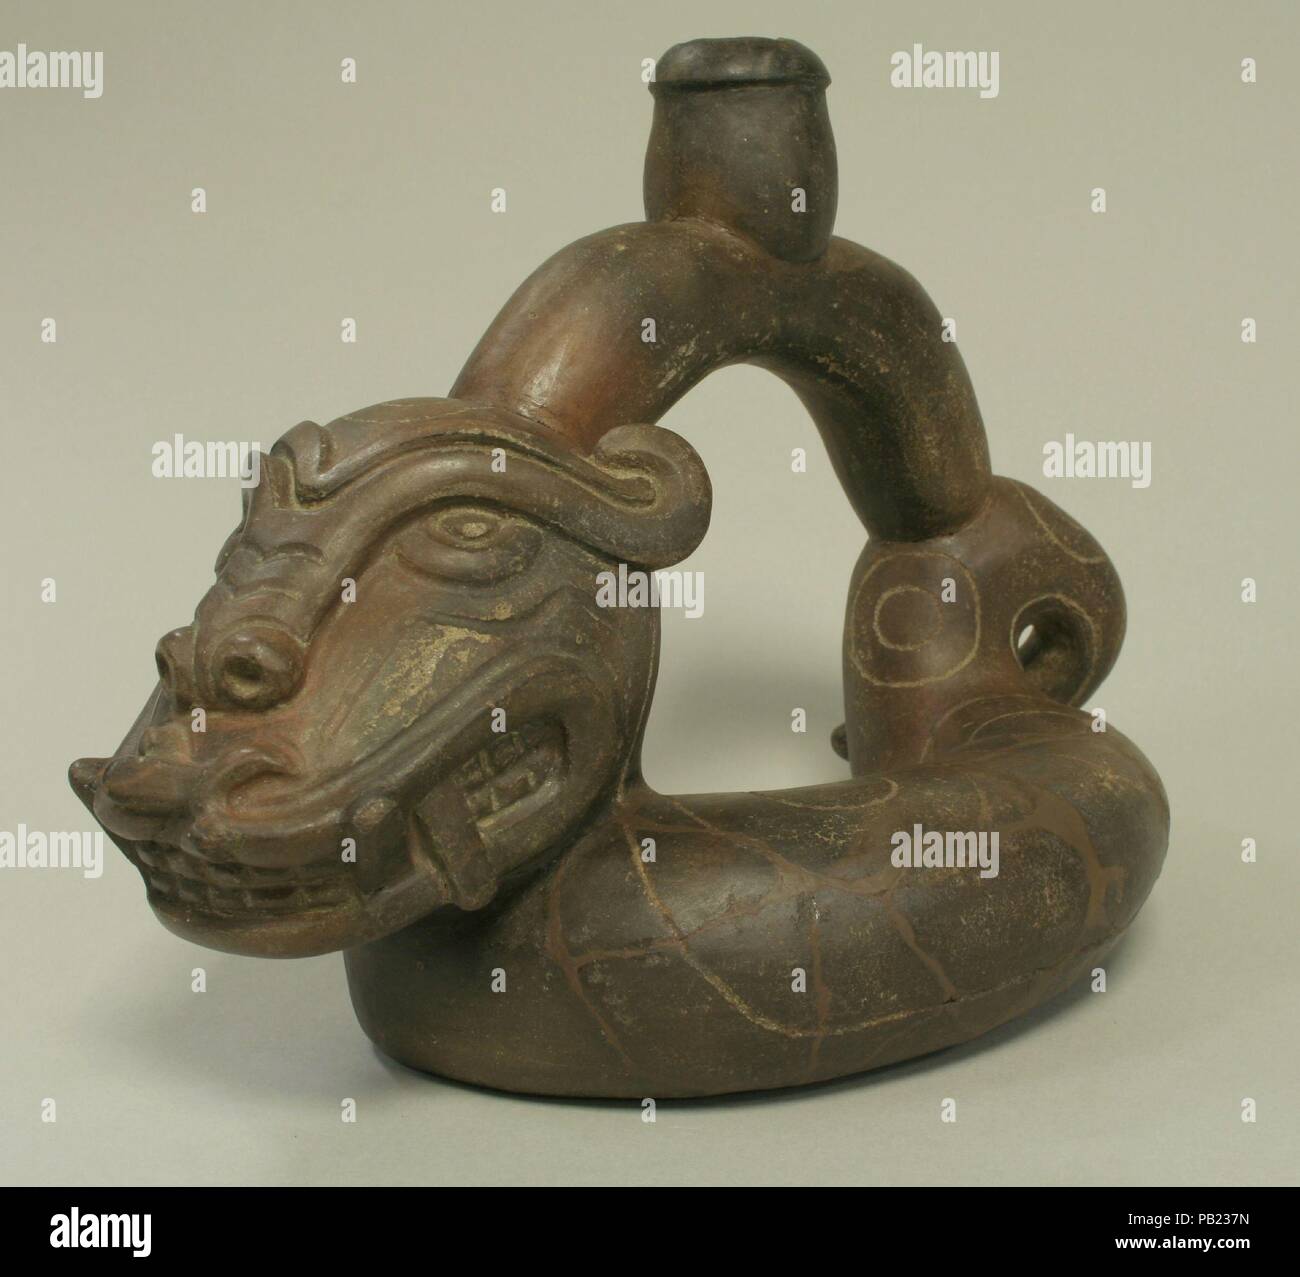 Stirrup Spout Bottle: Serpent. Culture: Cupisnique. Dimensions: Height 8 in. (20.3 cm). Date: 12th-5th century B.C.. Museum: Metropolitan Museum of Art, New York, USA. Stock Photo